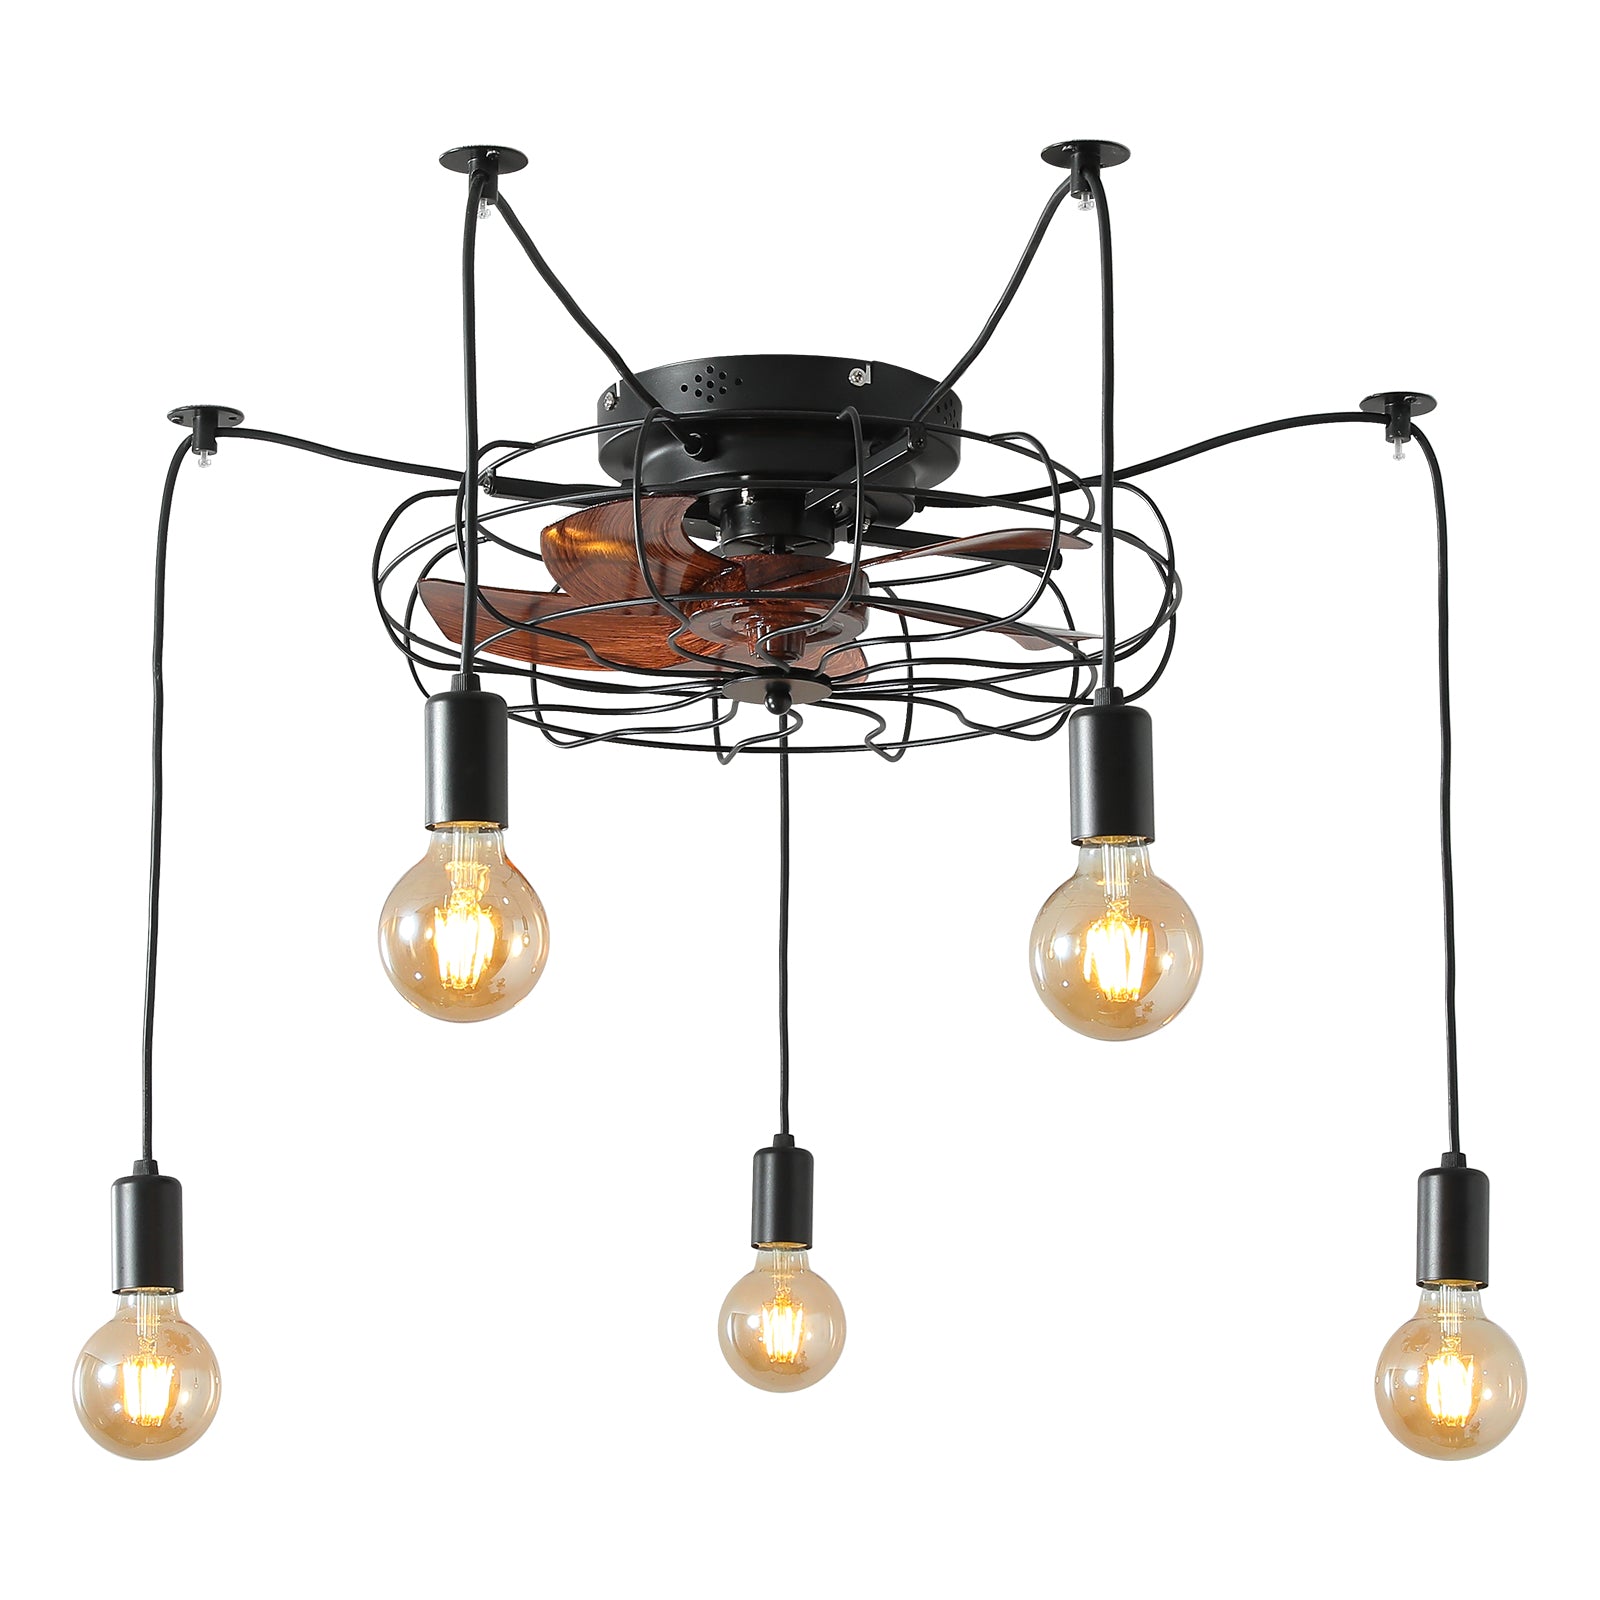 Vintage Industrial Chandelier Ceiling Fan With Remote for Living Room